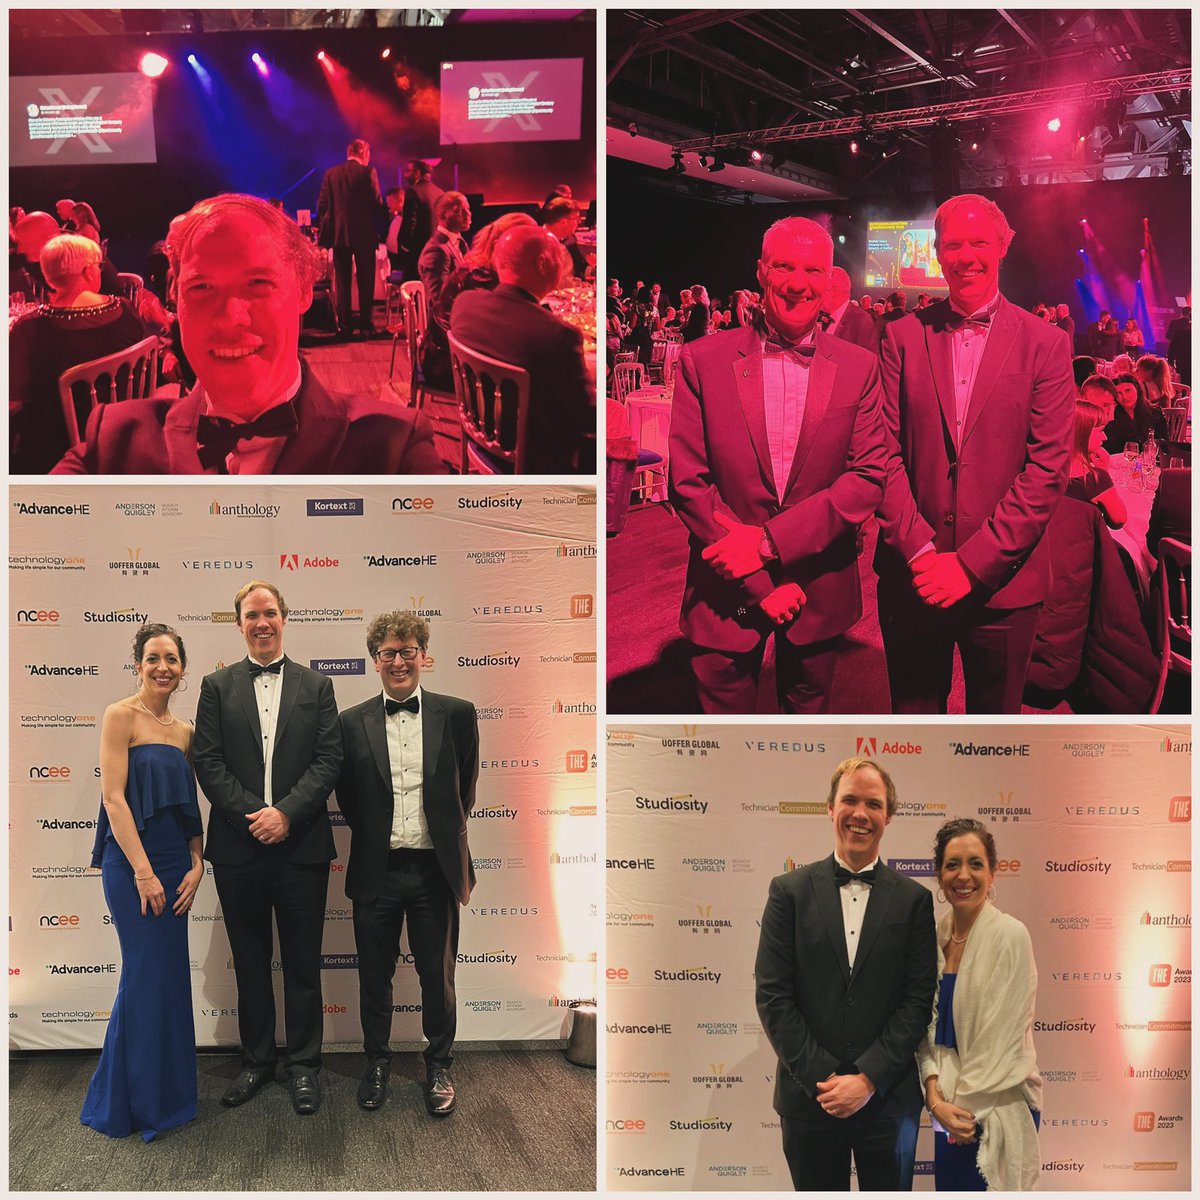 Last night I was at @timeshighered awards #THEawards, for being shortlisted for Outstanding Technician of the year! 
I didn’t win but what an honour to be shortlisted! 
I’m just doing my job 🤙
.
.
#justdoingmyjob #outstandingtechnicianoftheyear #techniciansmakeithappen